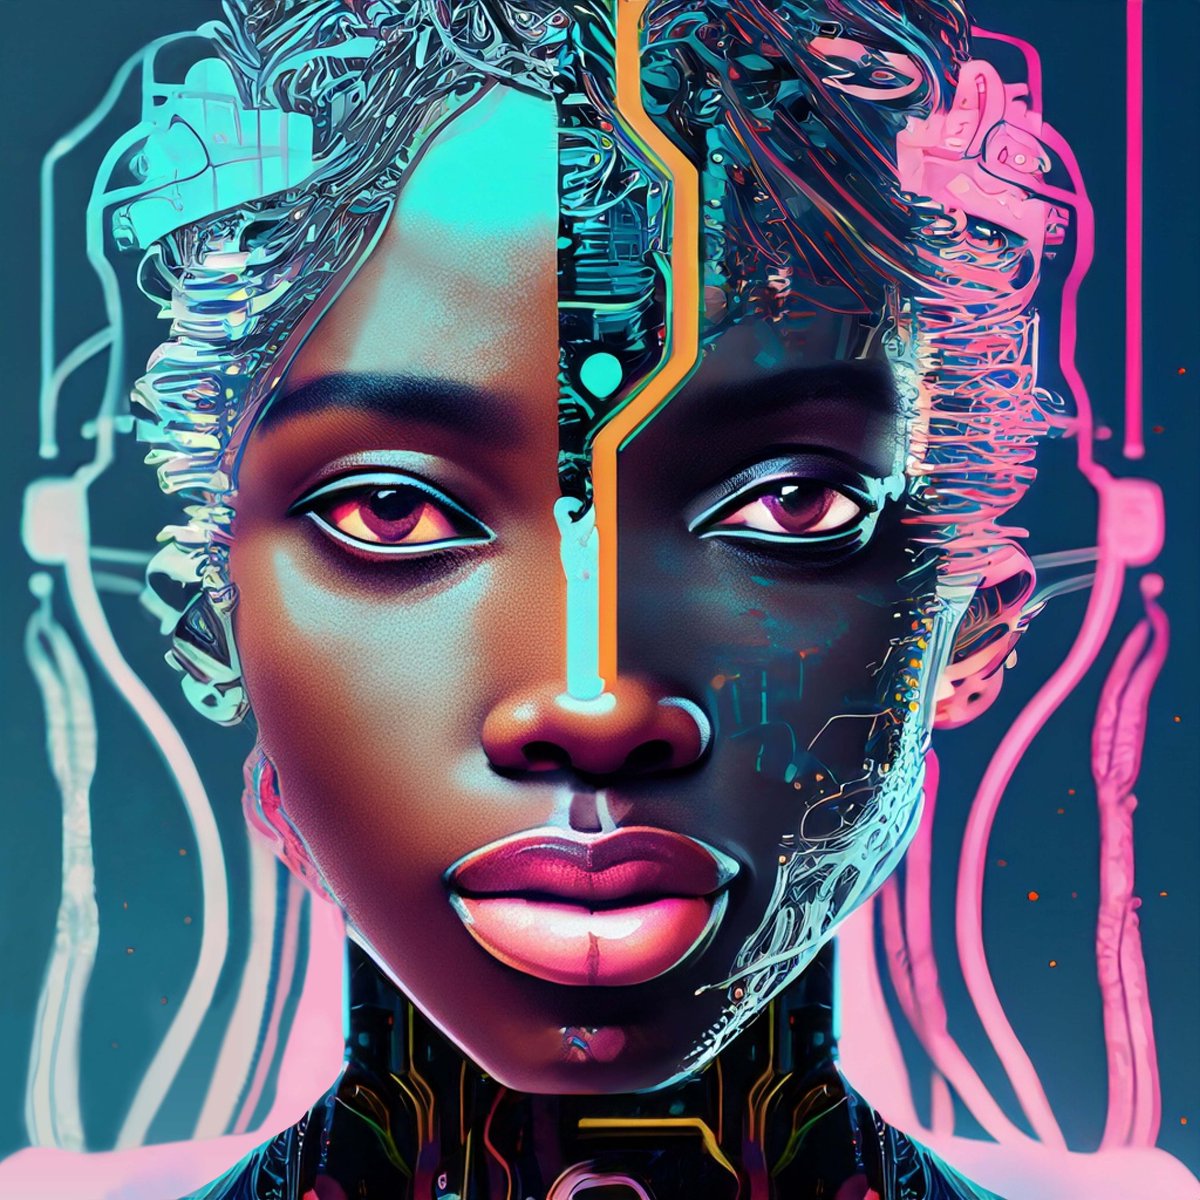 'Ethereal Interface' – Submitted for consideration in HUG's exhibition partnership with L'OREAL for their Beautyverse Event in NYC and crafted with Adobe Firefly & Photoshop! Embrace the future now! 🌟🤖 #HUGIRL #BeautyInnovation @thehugxyz